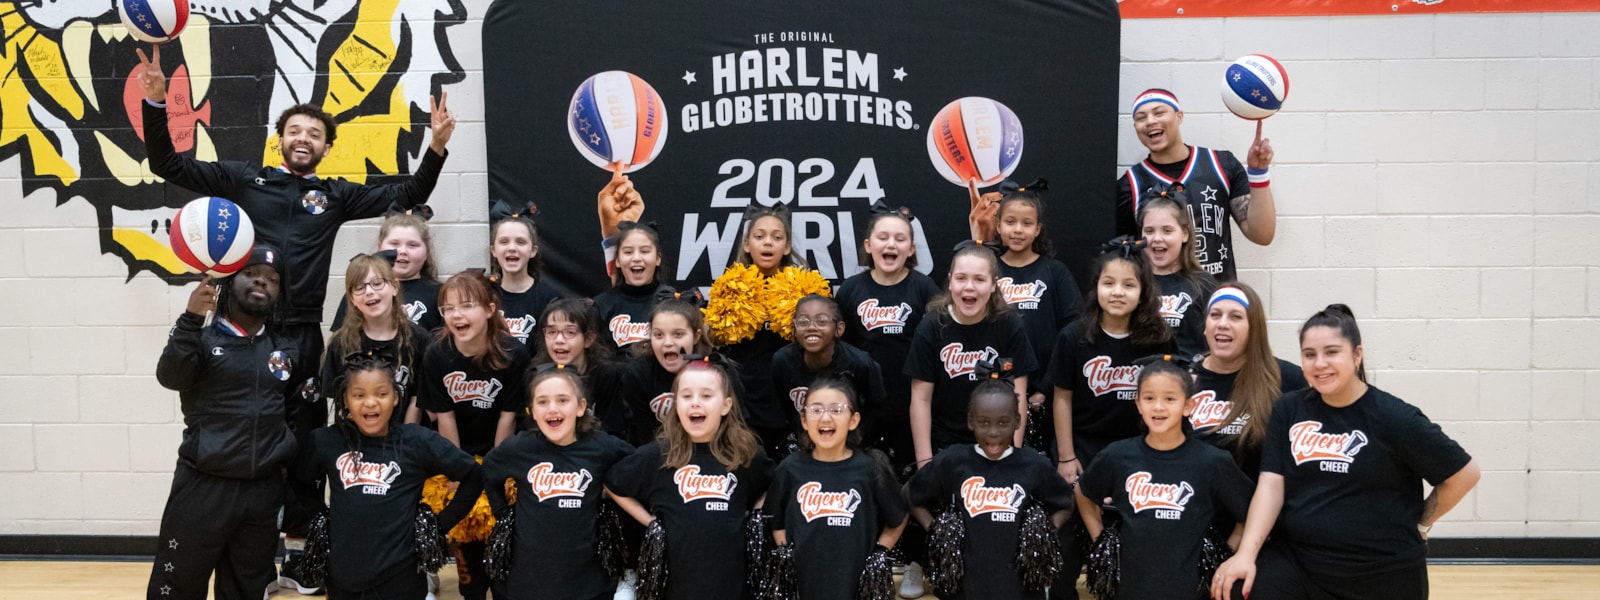 The cheerleaders and the Harlem Globetrotters